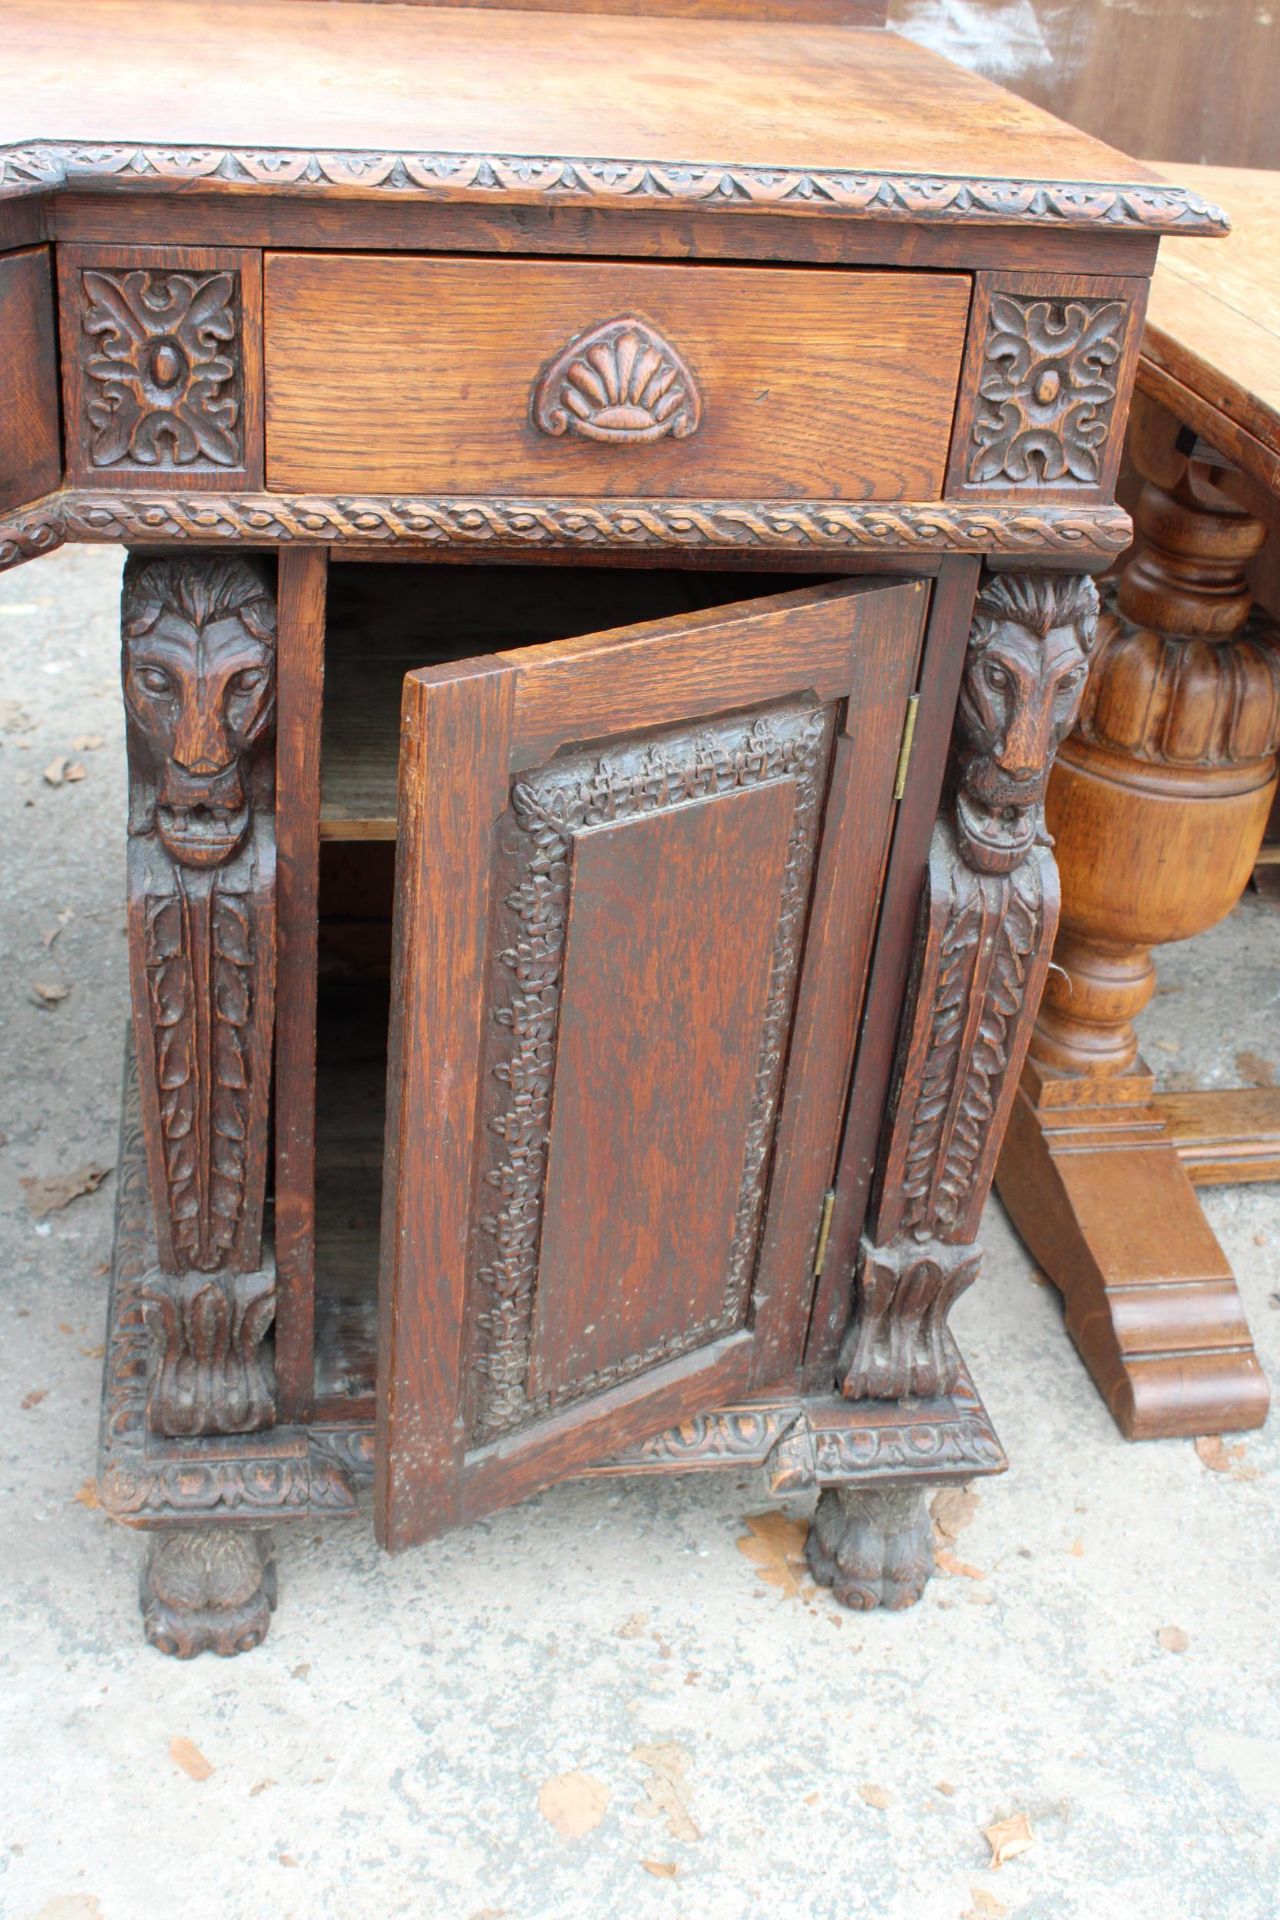 A VICTORIAN OAK BREAKFRONT SIDEBOARD ON CARVED CLAW FEET WITH CARVED PANELS WITH MYTHICAL - Image 2 of 4